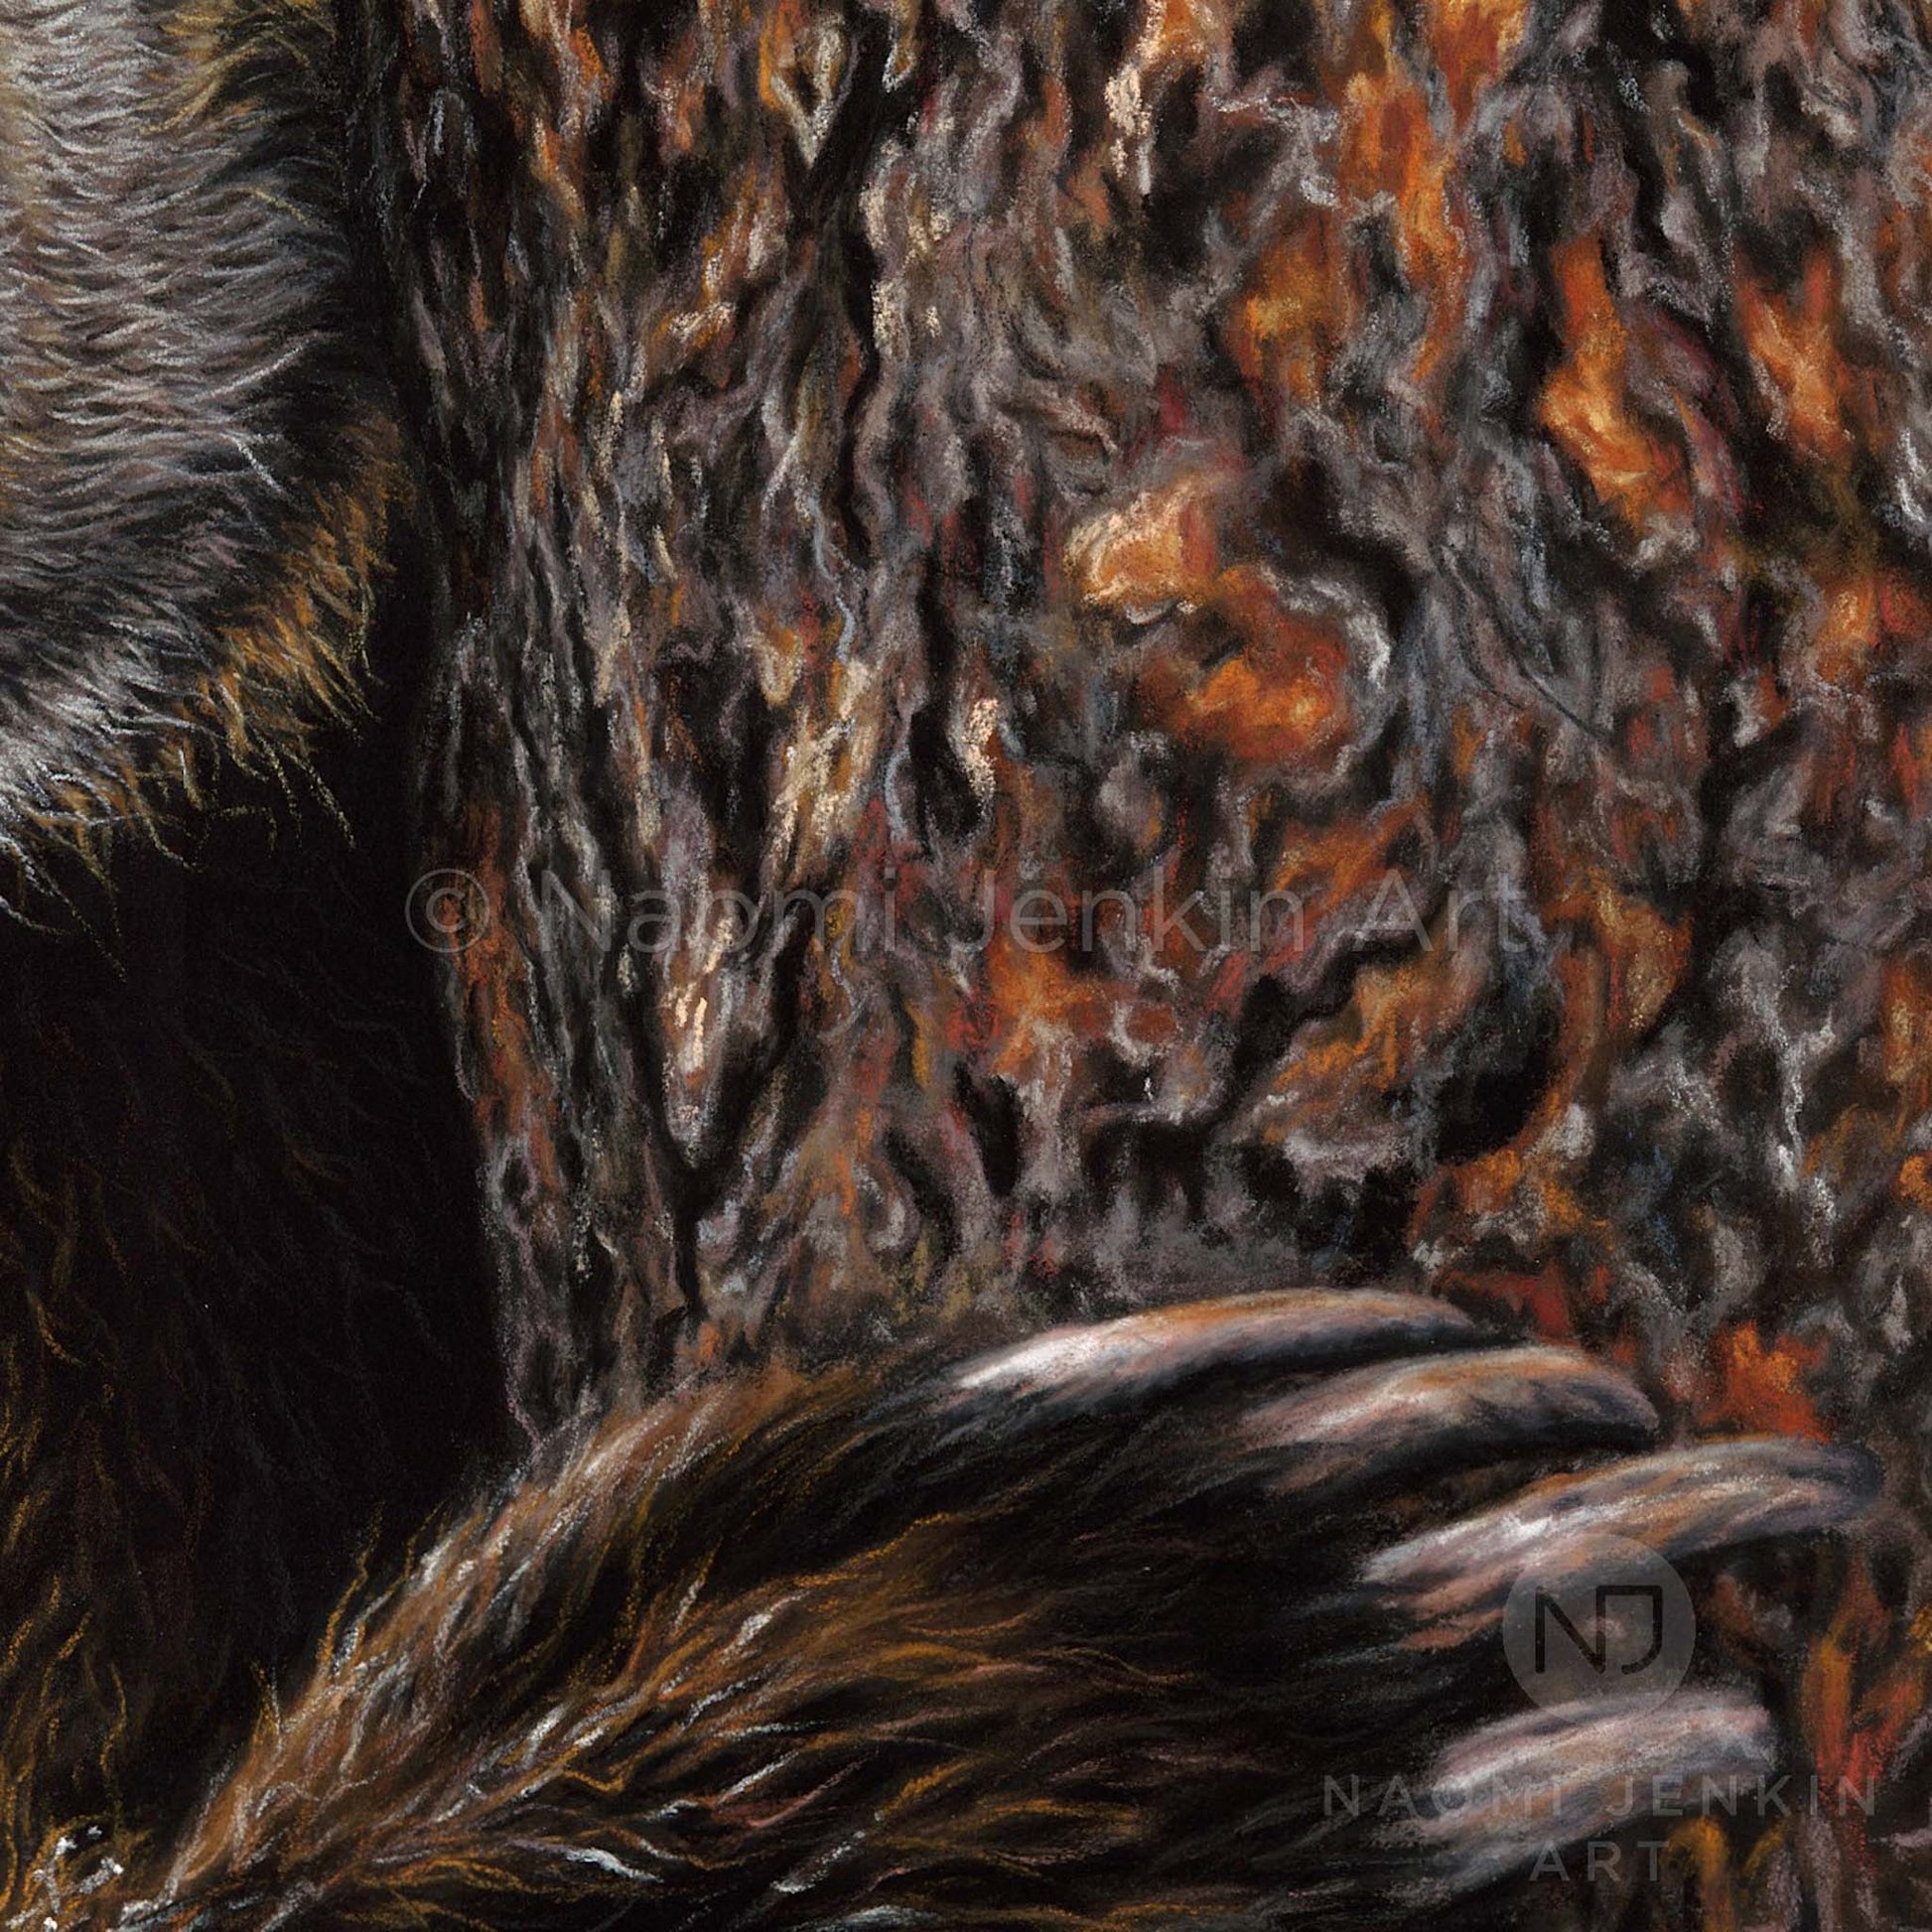 Fur and paw close up from the grizzly bear painting by wildlife artist Naomi Jenkin